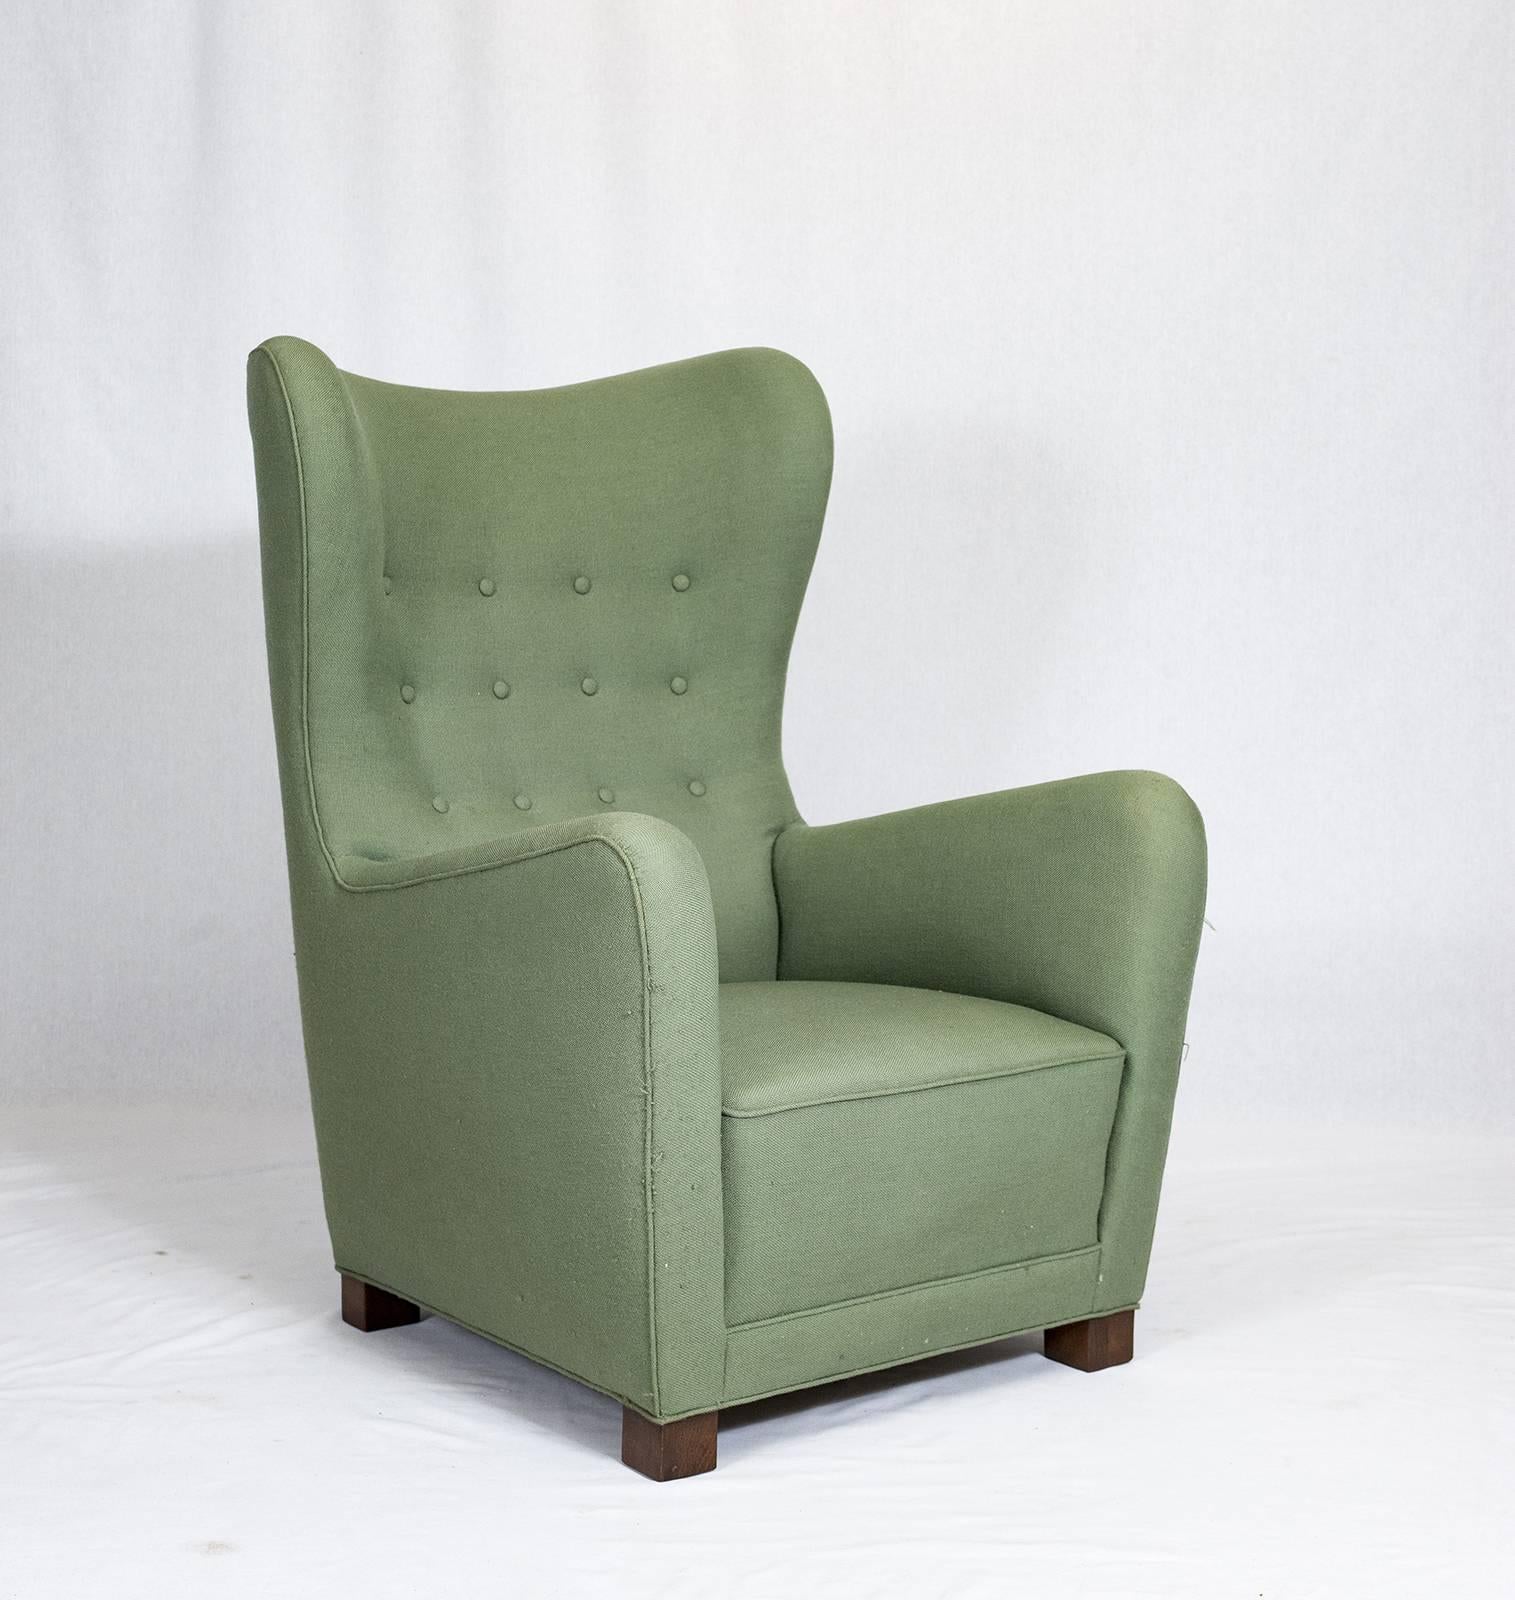 Fritz Hansen high back lounge chair model no.1672.     Store formerly known as ARTFUL DODGER INC